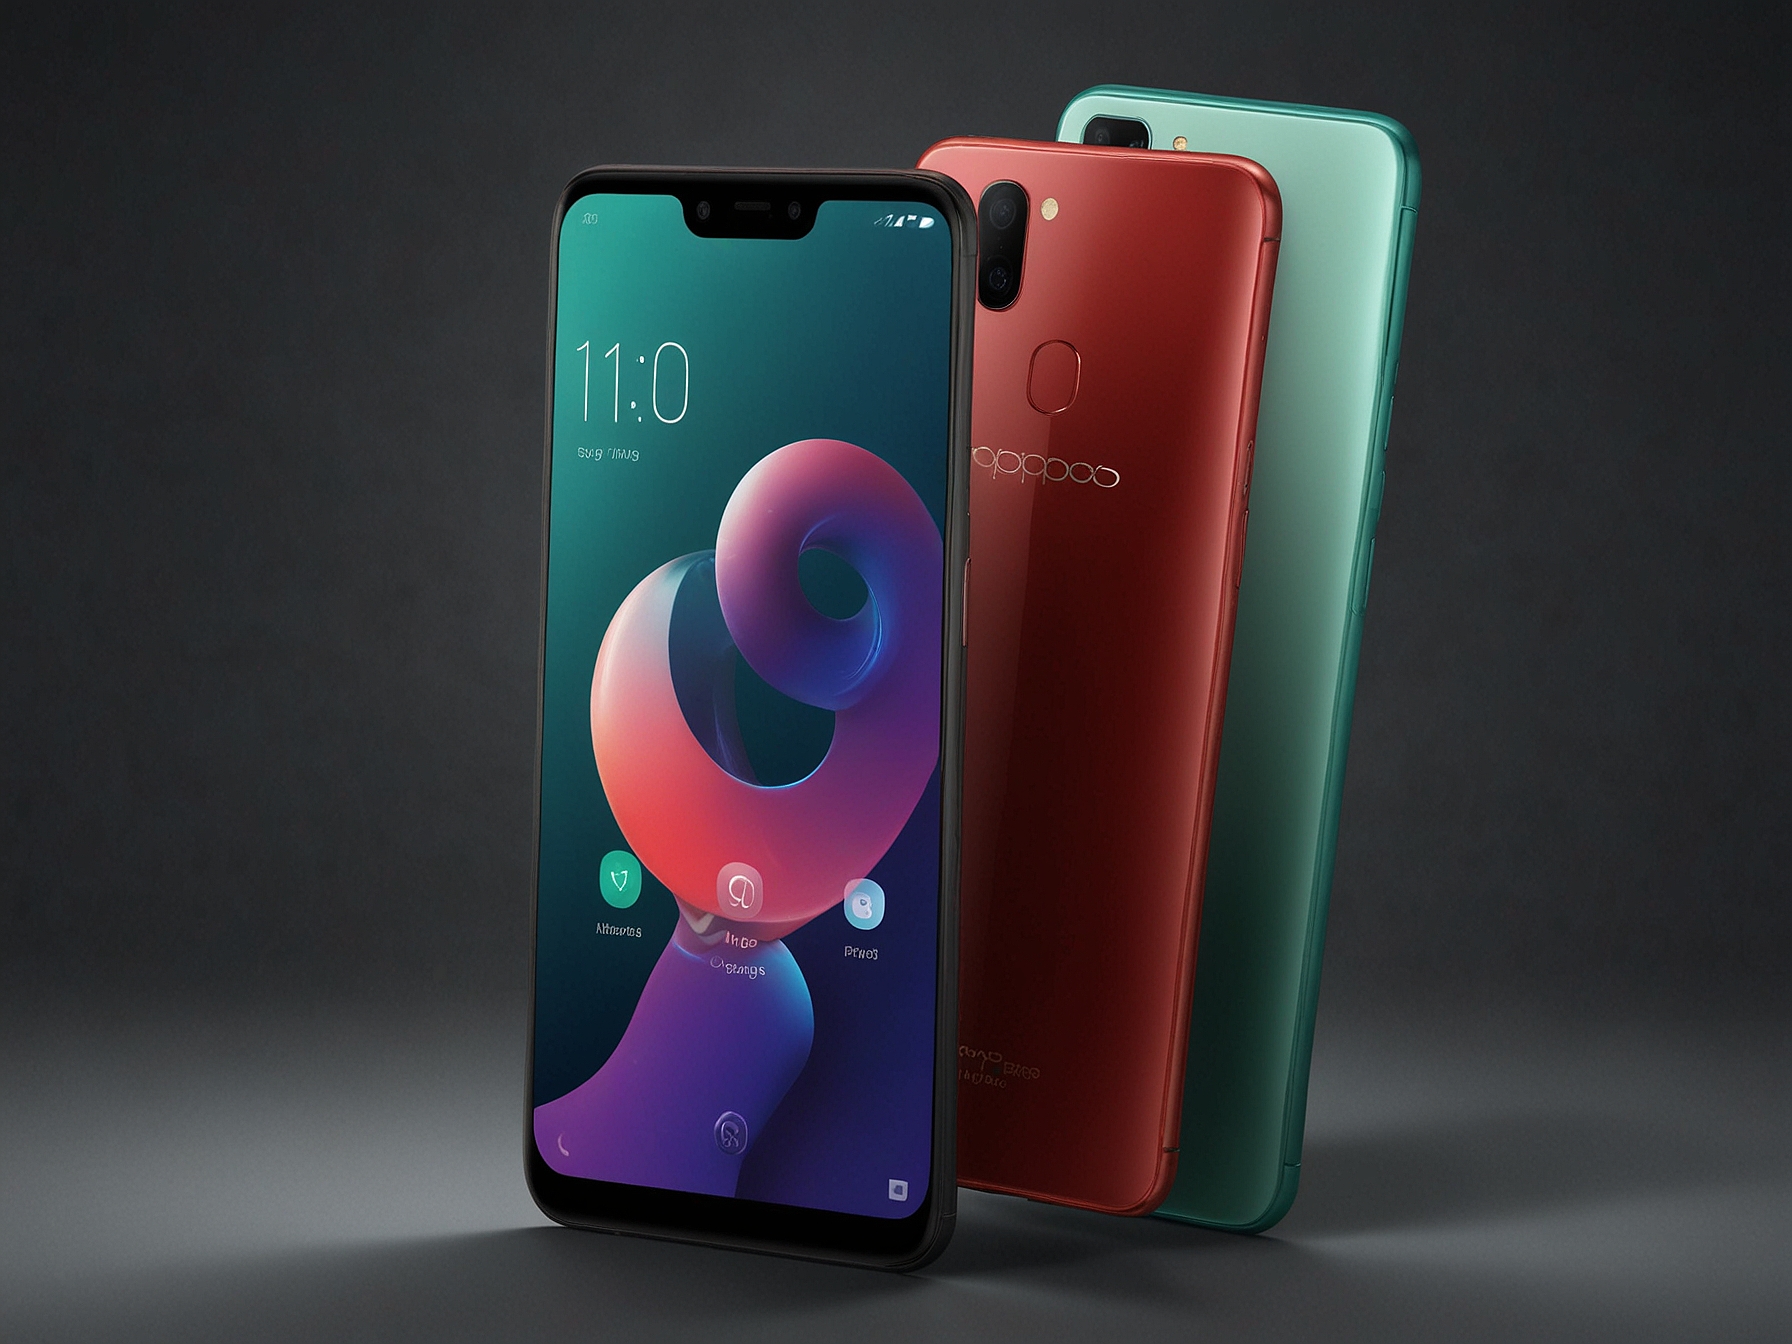 The Oppo A3 Pro smartphone showcasing its sleek design and large Full HD+ display, known for providing an immersive viewing experience, whether streaming videos or playing games.